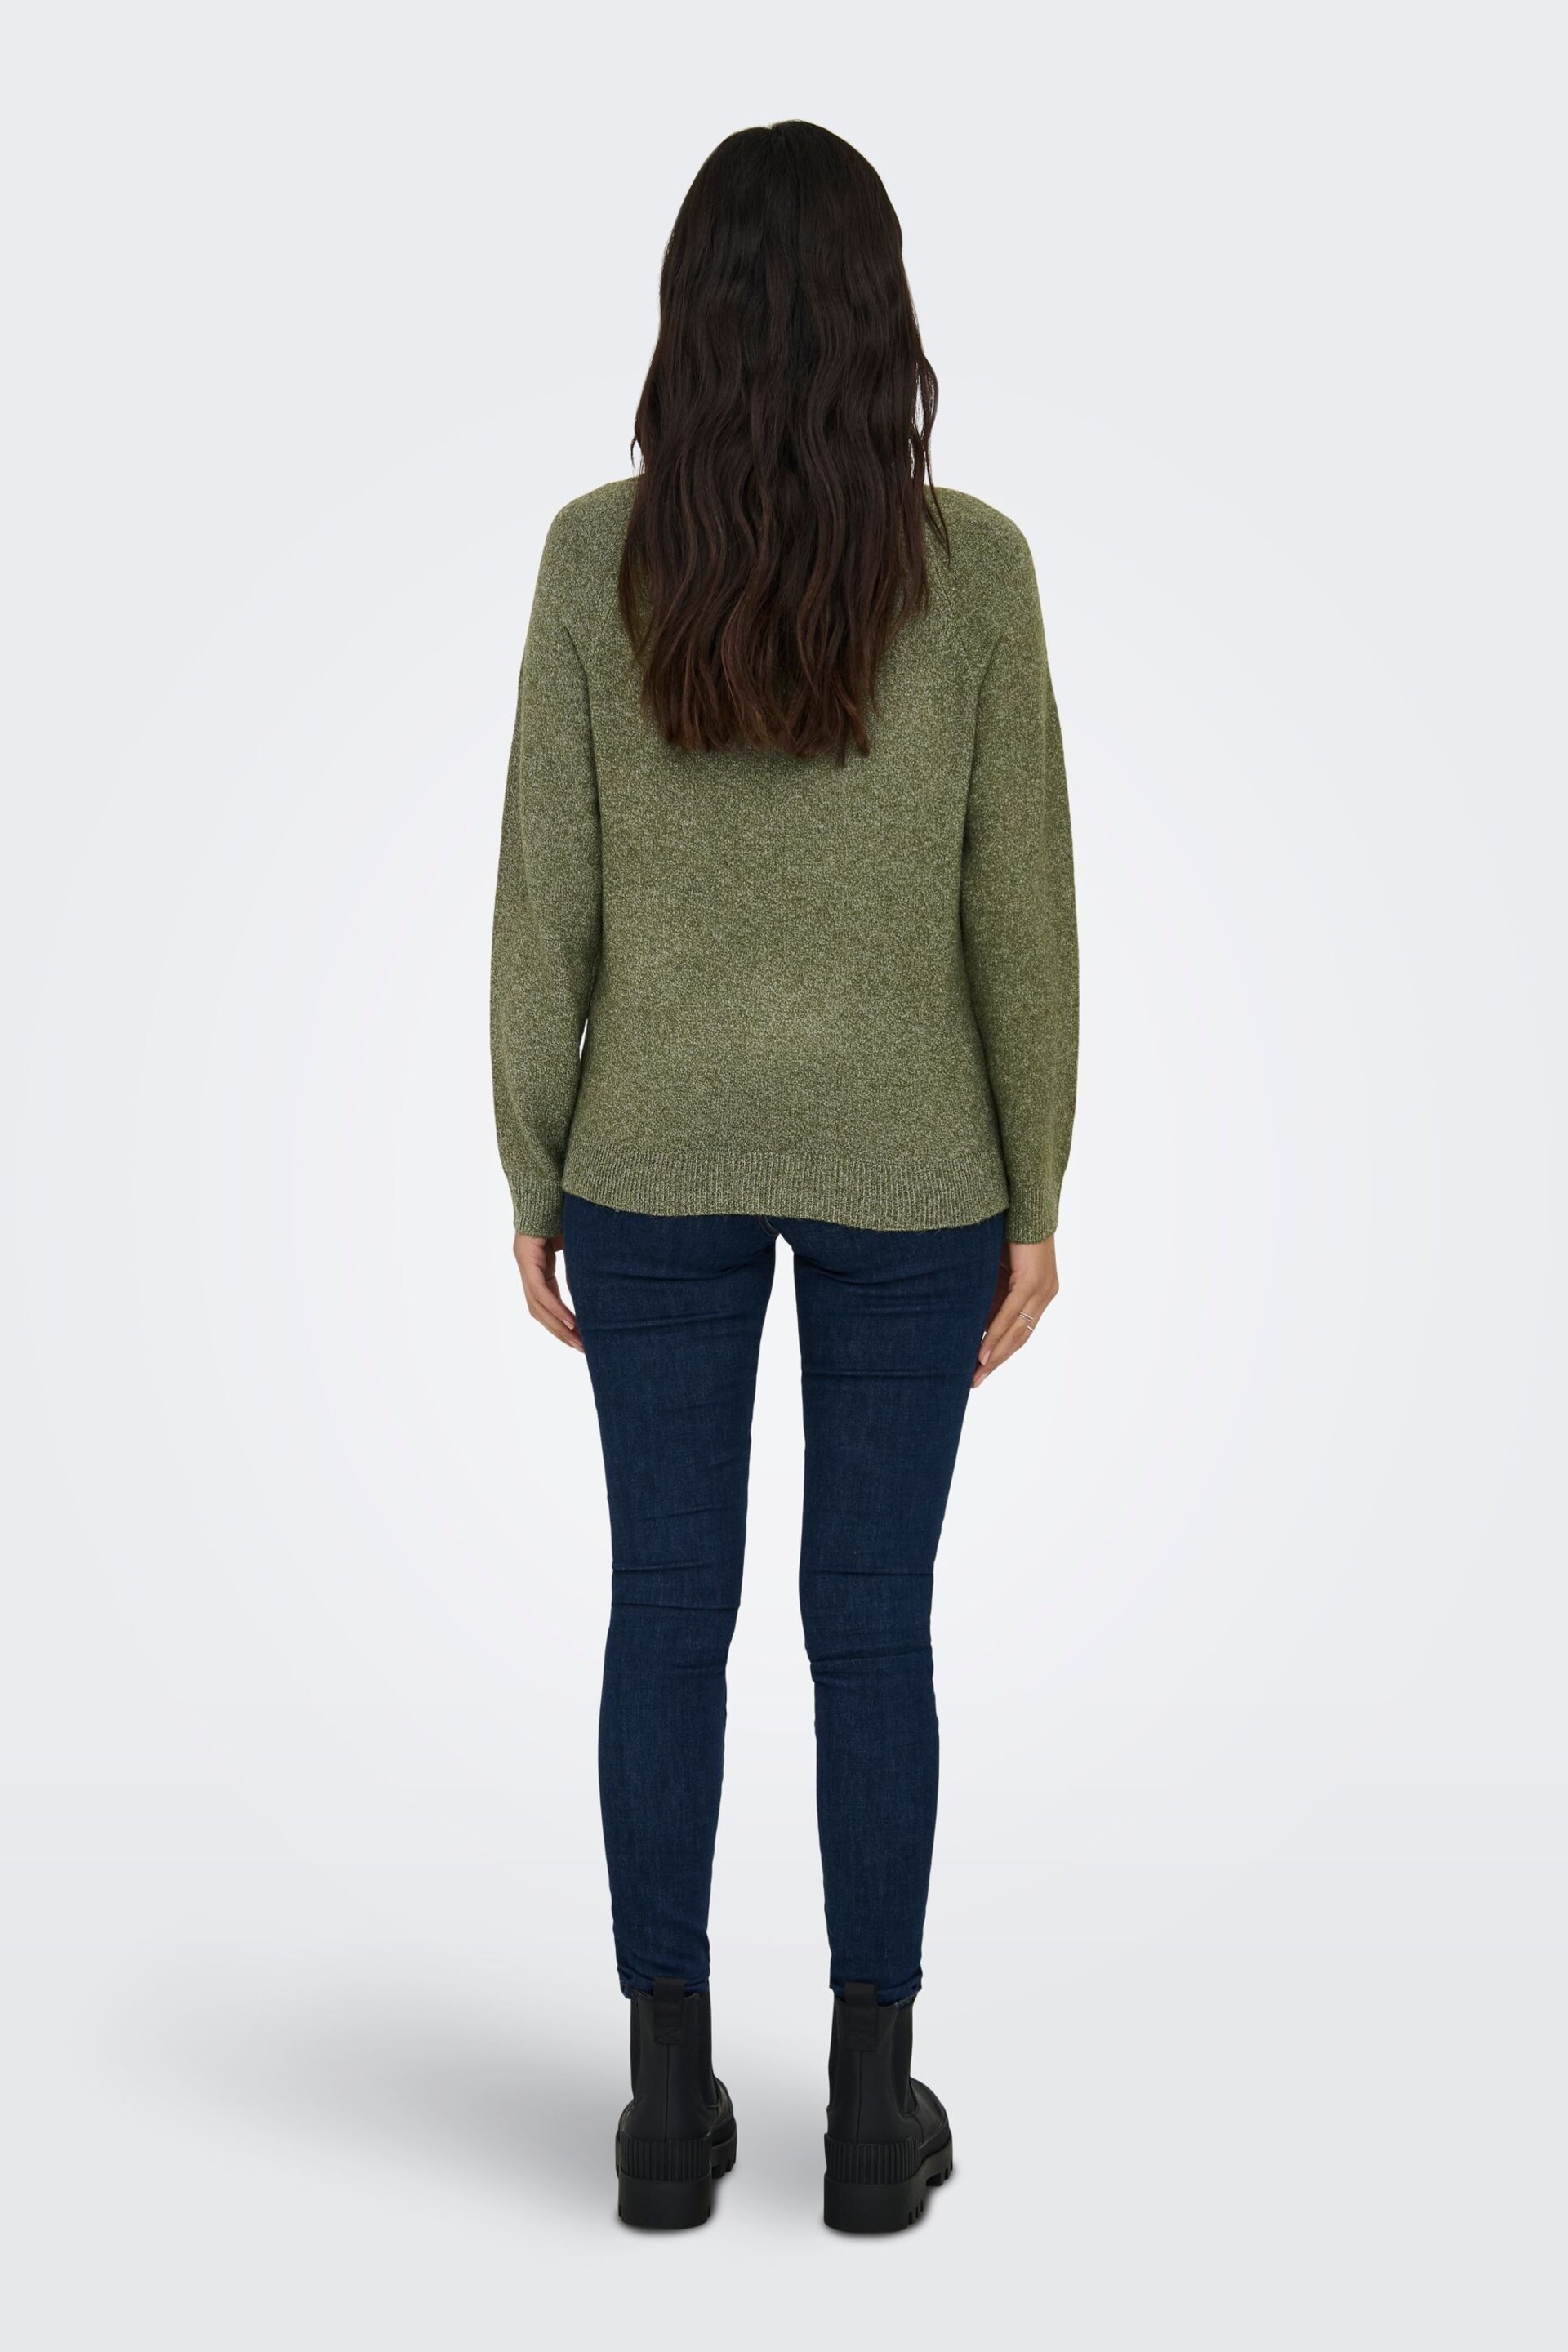 ONLY Green Round Neck Knitted Jumper - Image 2 of 5